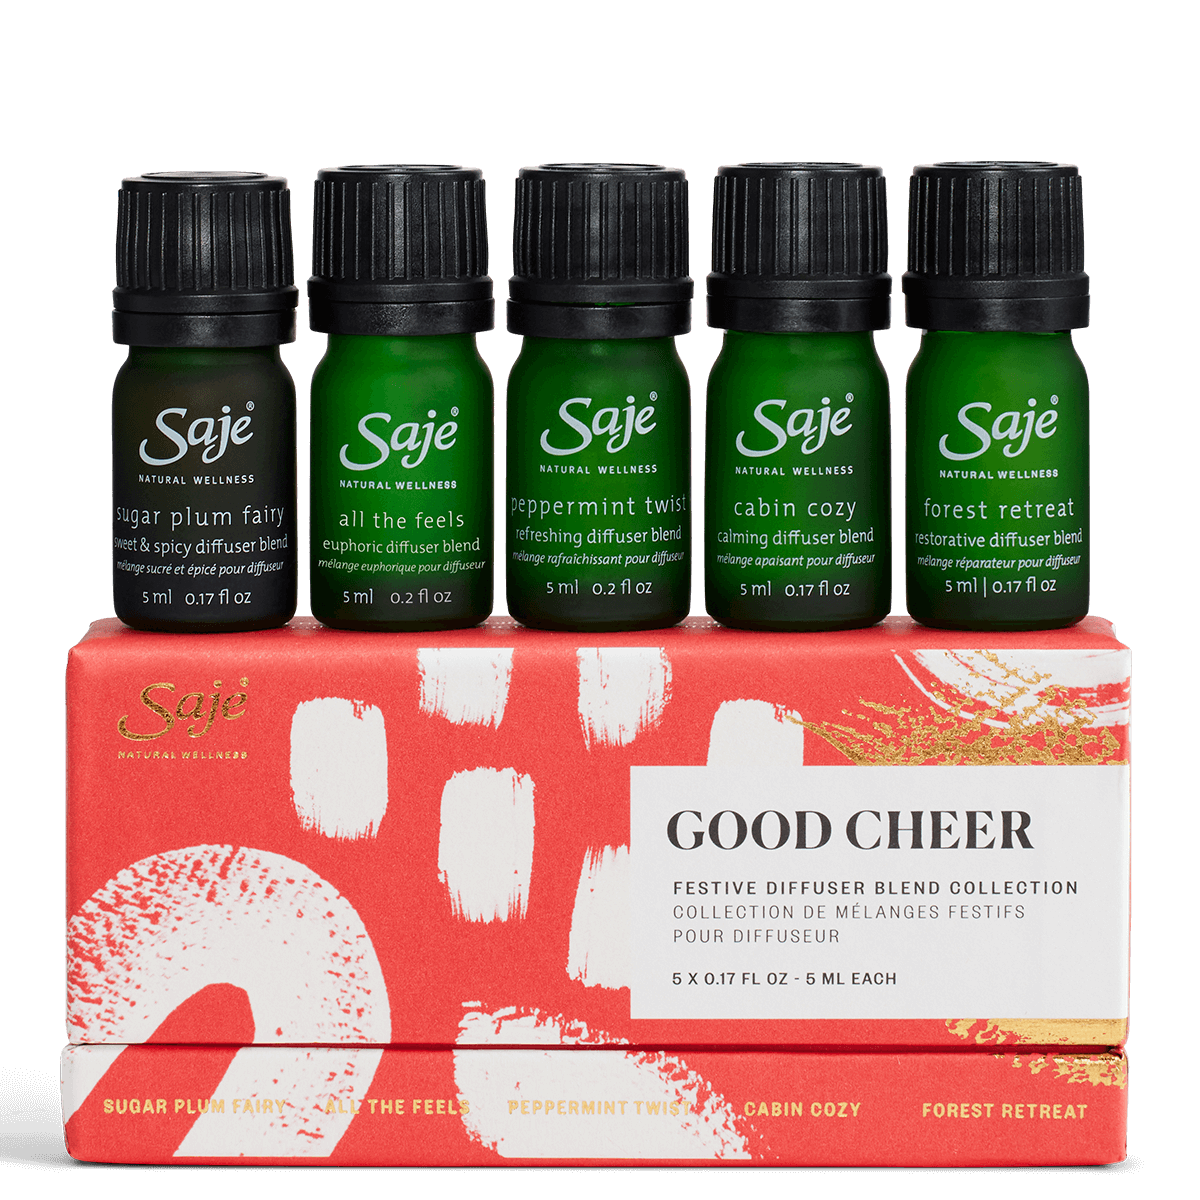 Good Cheer Festive Diffuser Blend Collection - Saje Natural Wellness